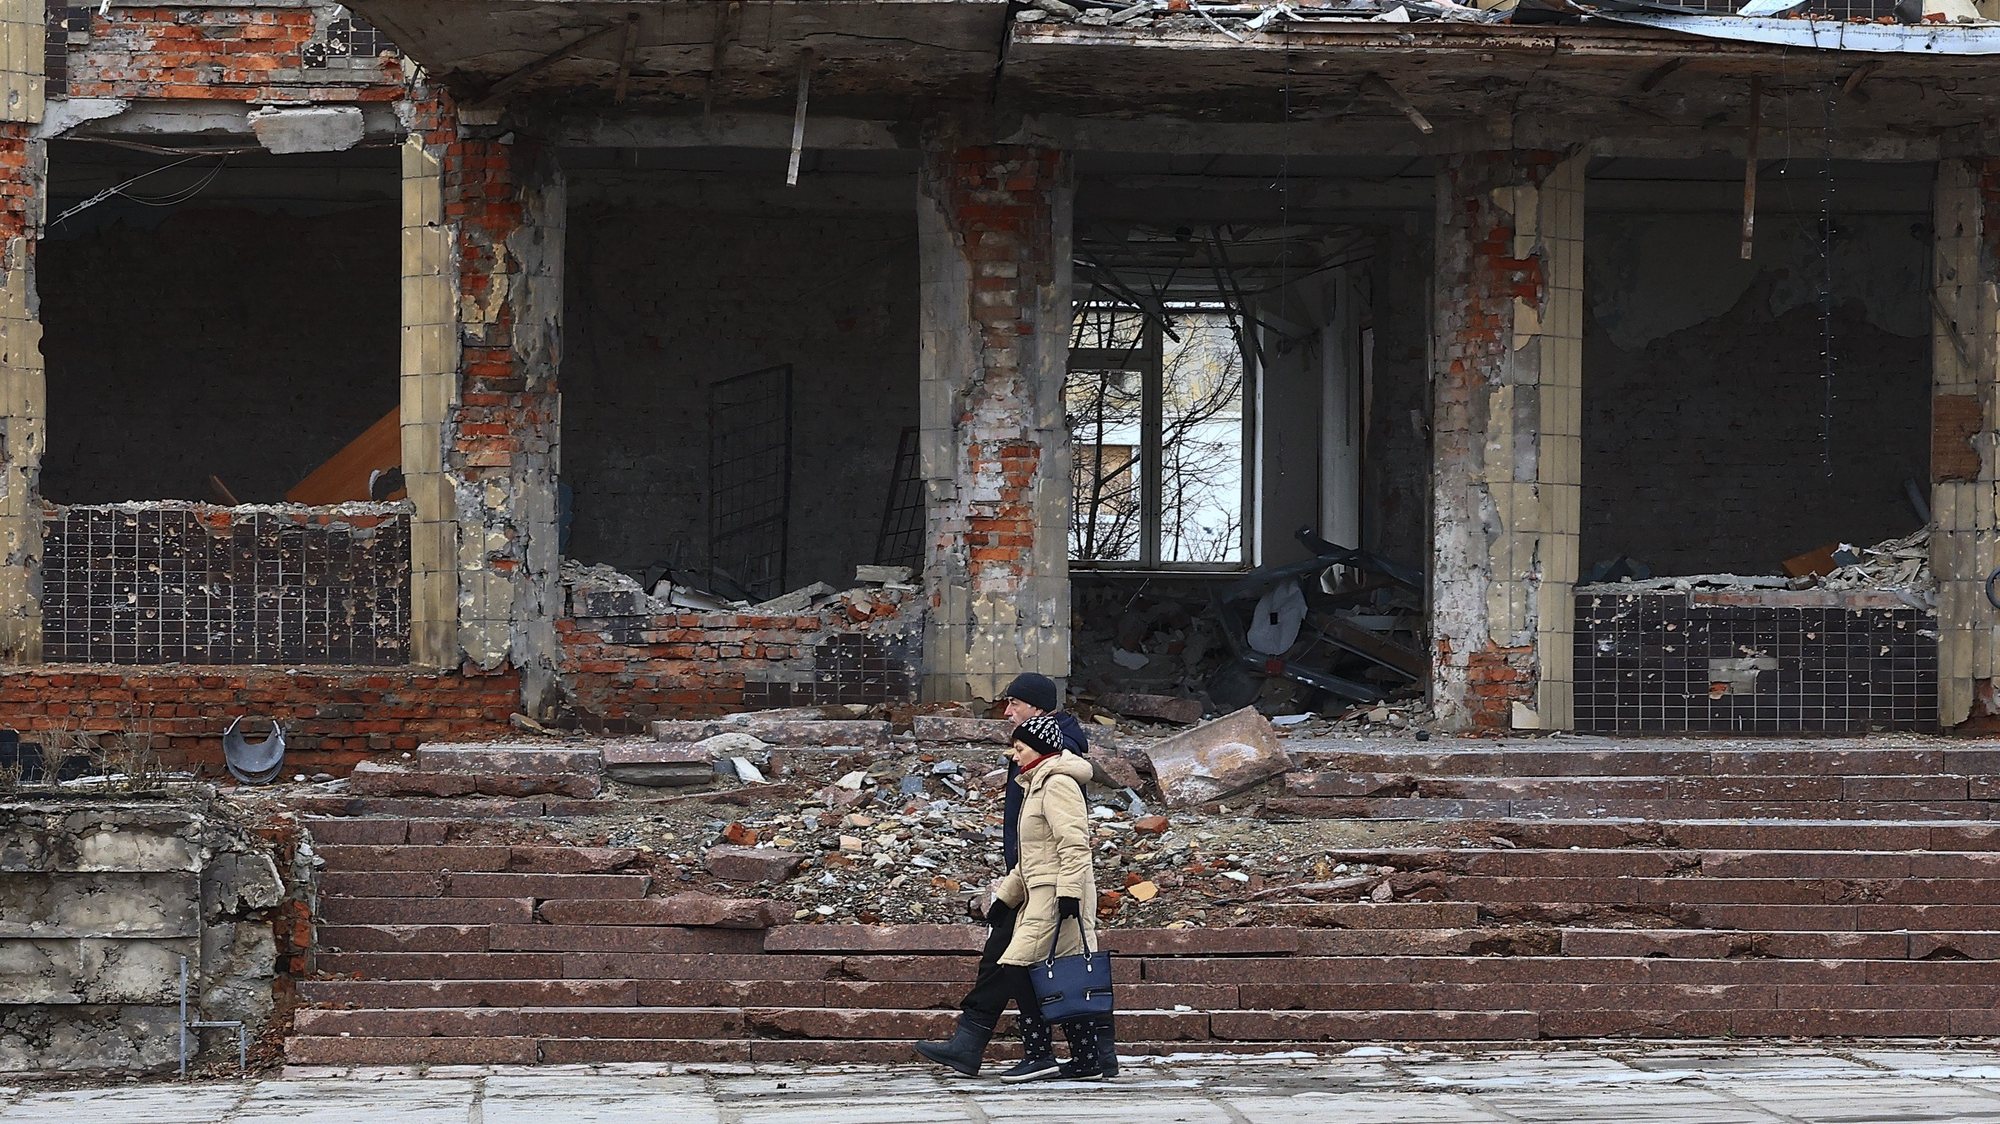 epa11137550 A couple walks near the rubble of destroyed buildings in Kupiansk, Kharkiv region, Ukraine, 08 February 2024, amid the Russian invasion. According to Ukrainian officials, Russian forces have been intensifying their offensive in the Kupiansk area of the front for more than six months as they try to regain control of the city since 2022, when Ukrainian forces recaptured control of the area in the Kharkiv counteroffensive.  EPA/ANTONIO COTRIM